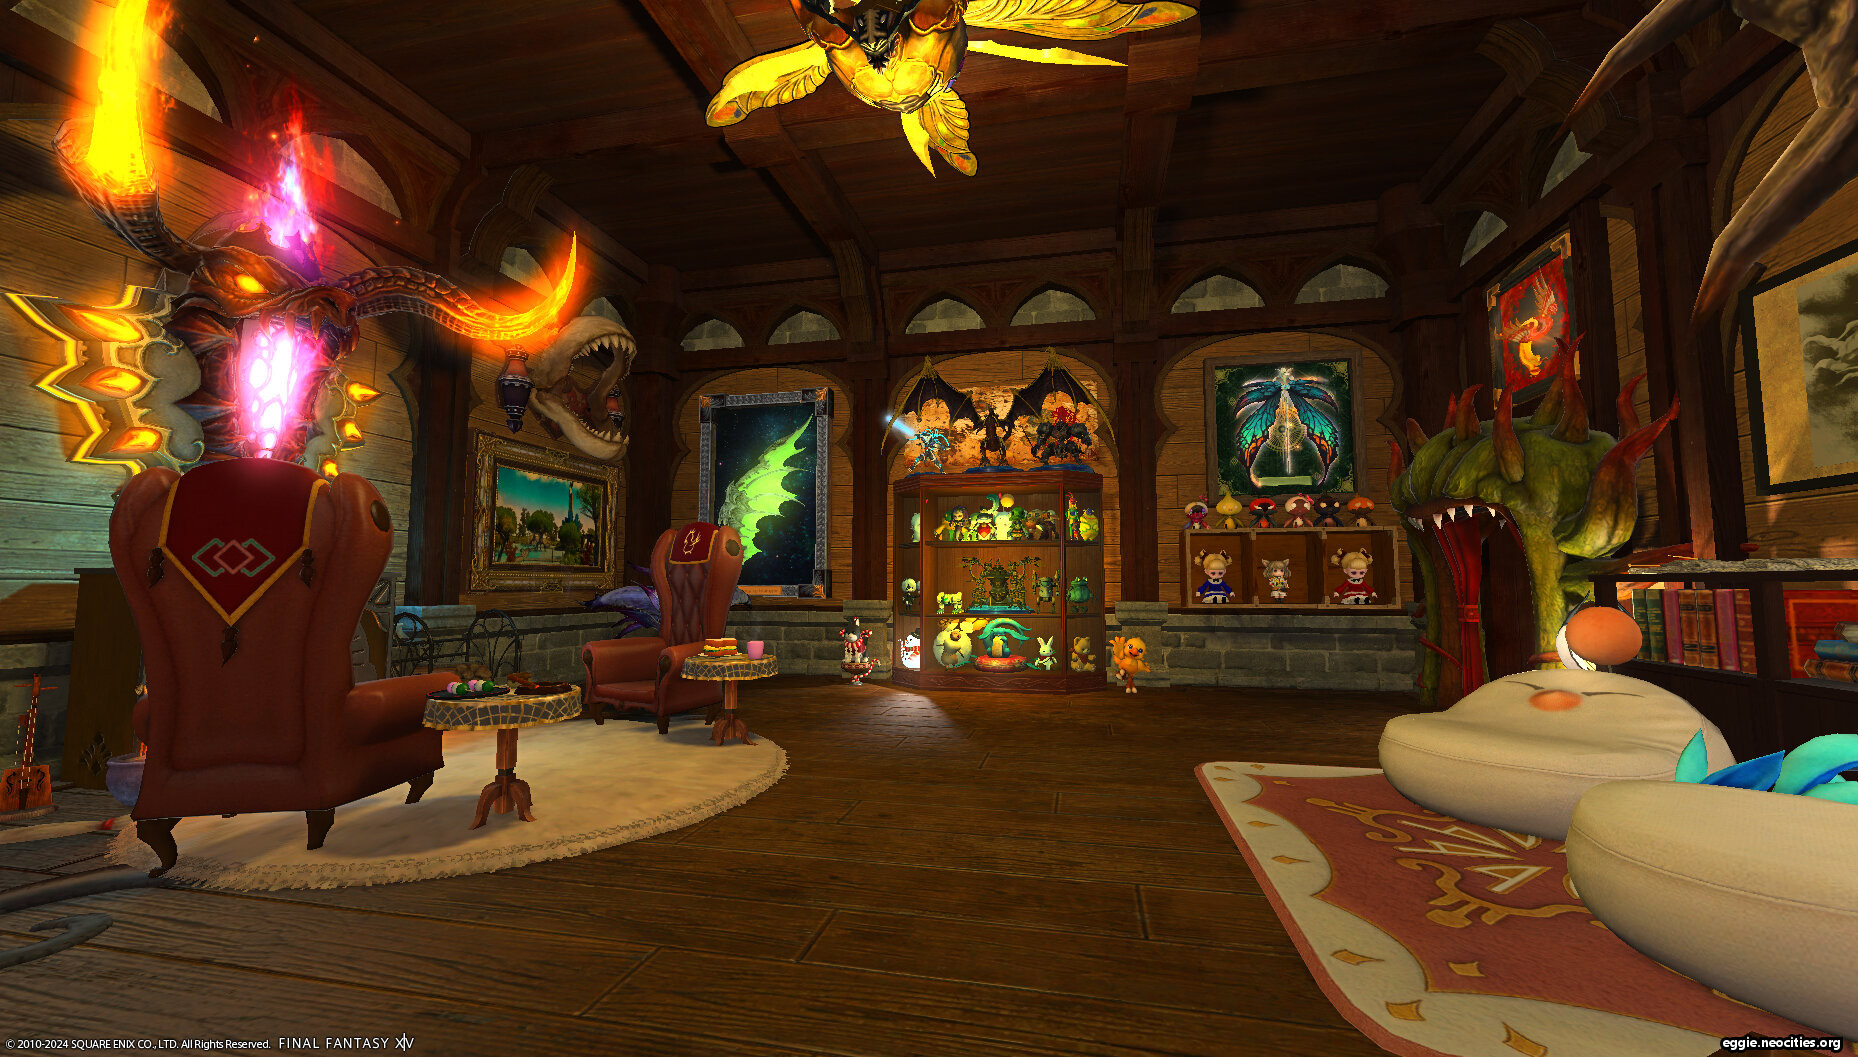 A shot of the inside of Zel's house, the Clan Nutsy Hunters' Lodge. There is a lot of furniture crafted from monsters and primals, as well as a showcase full of dolls and figurines.